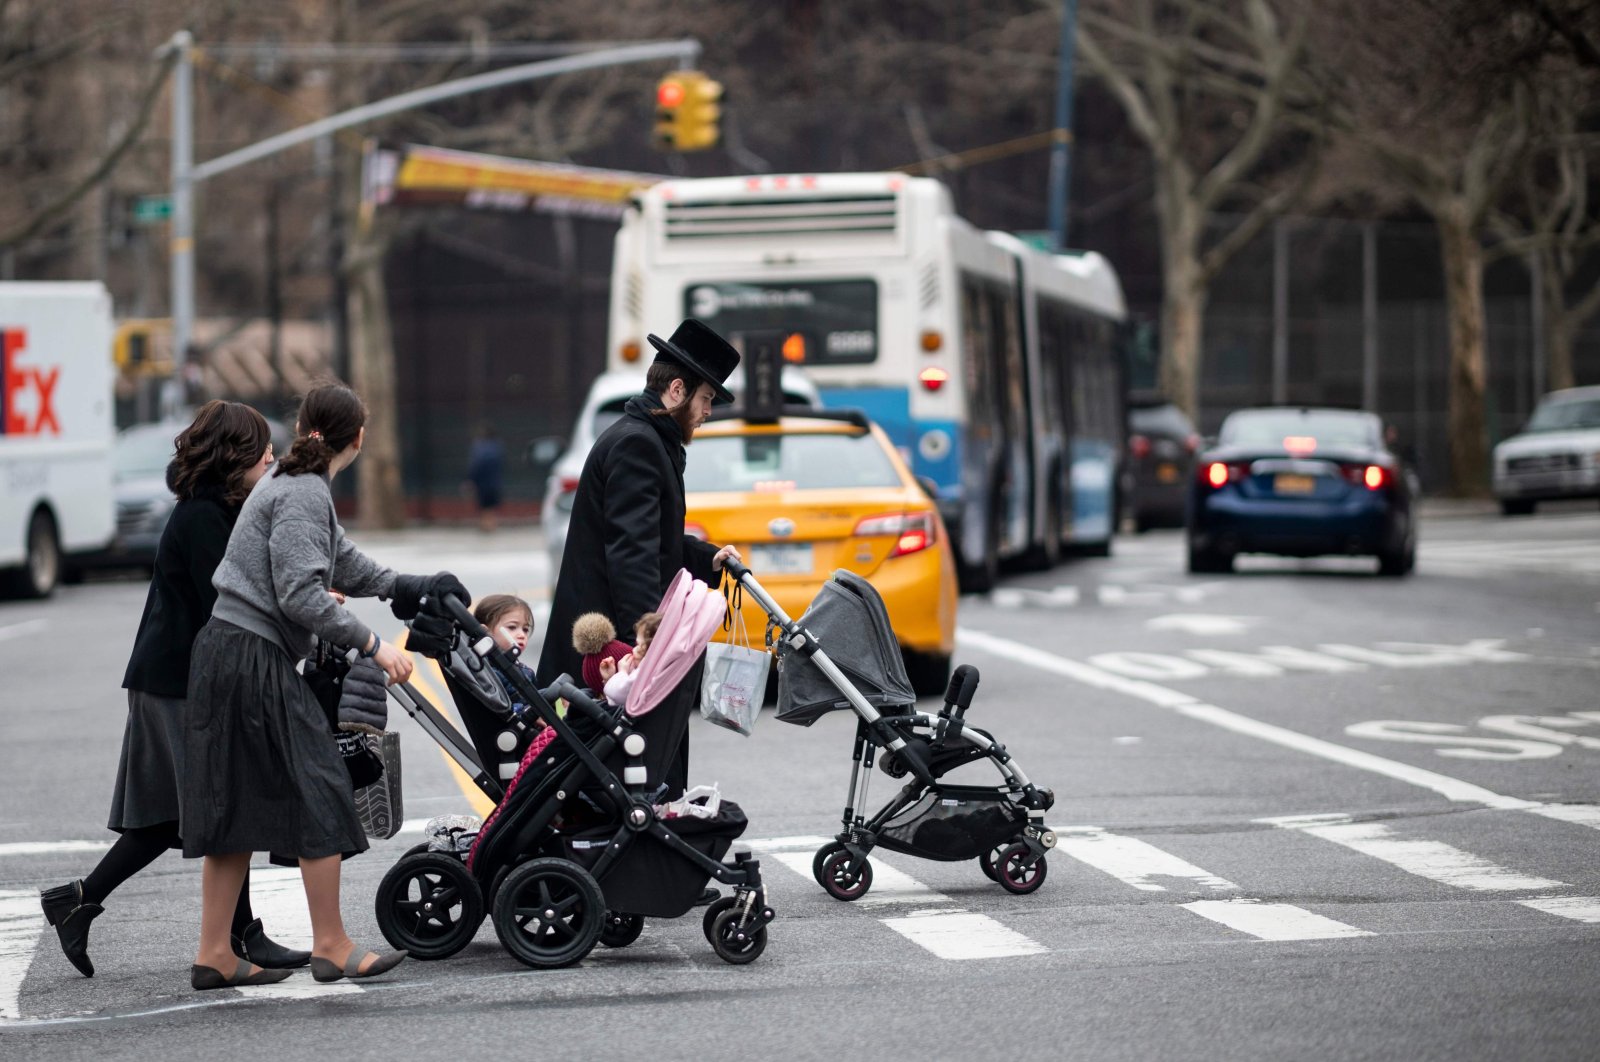 A Jewish man and two woman pushes strollers as they cross a street in a Jewish quarter in Williamsburg Brooklyn, New York City, April 9, 2019. (AFP Photo)